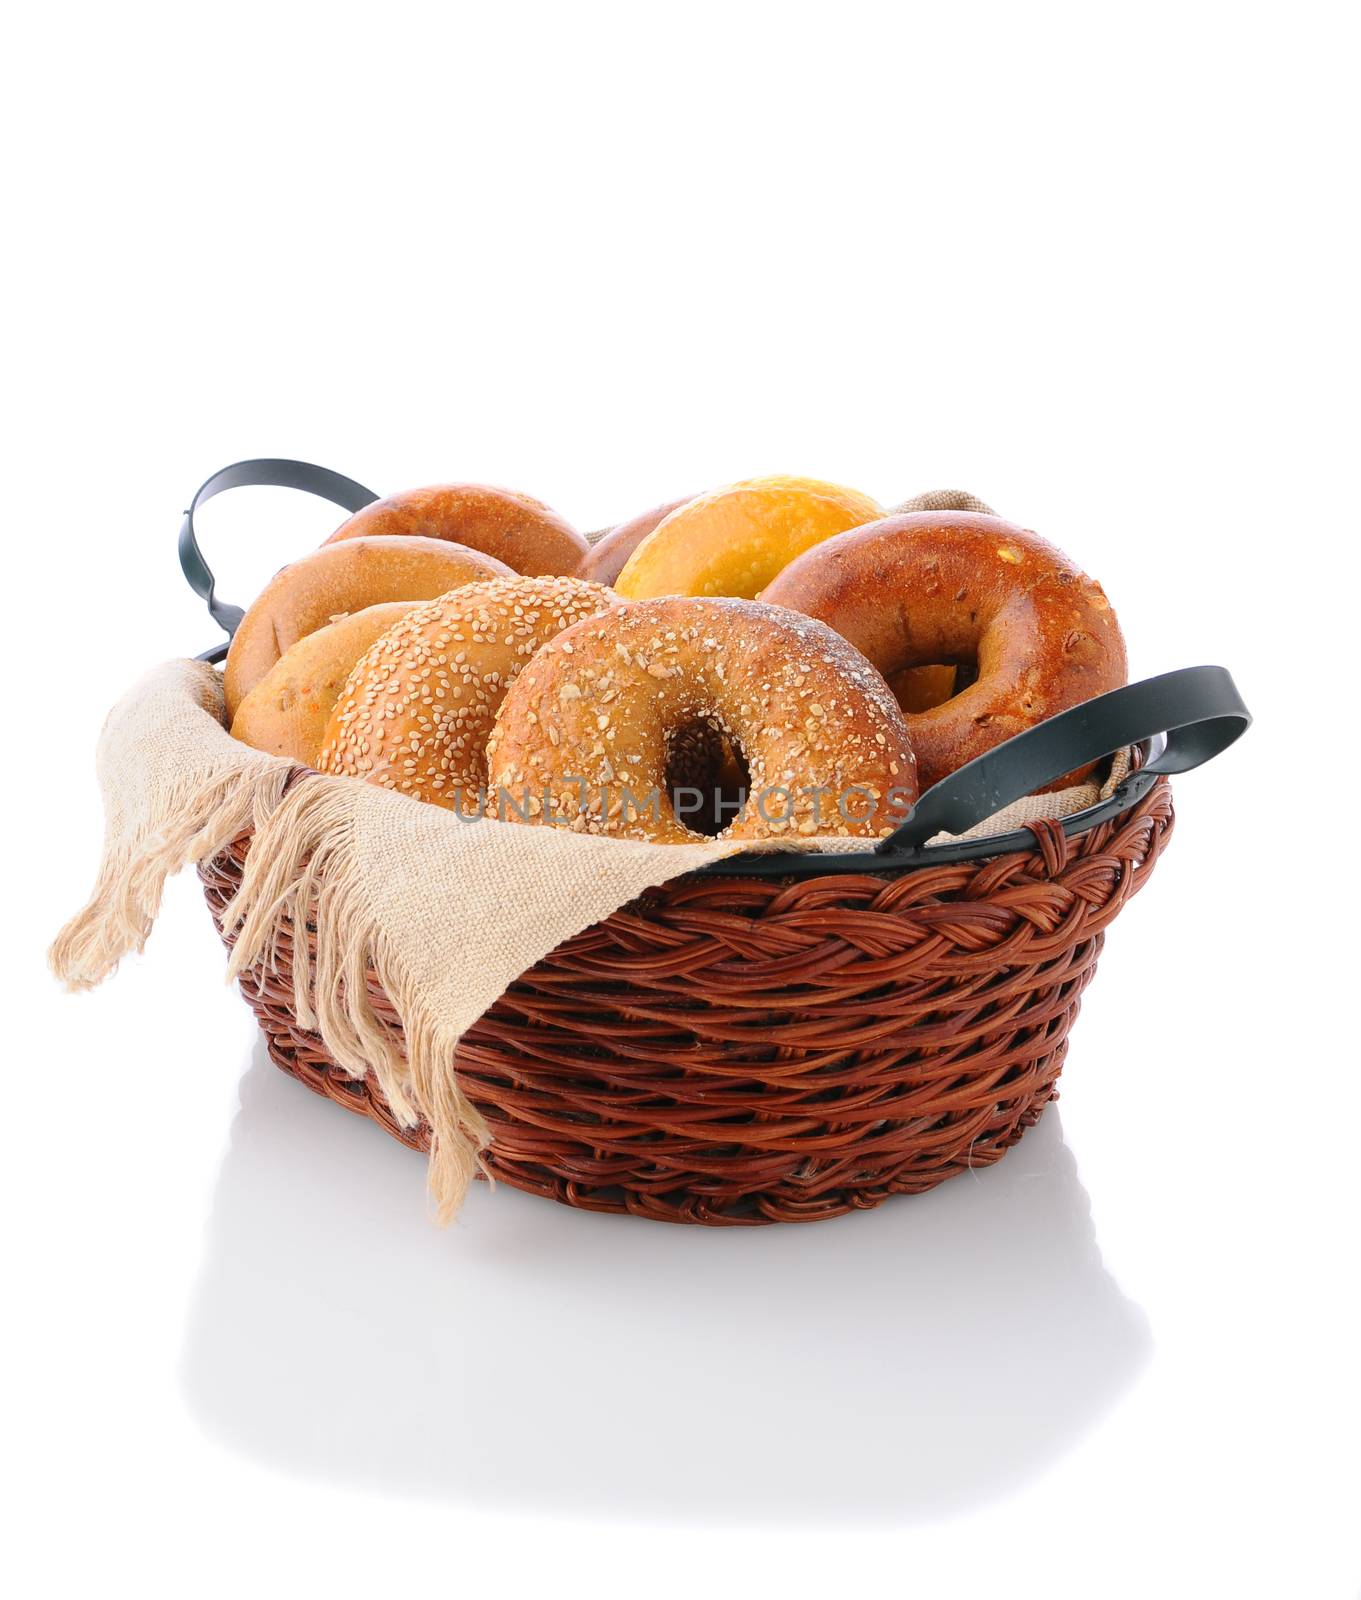 A basket of assorted bagels on a white surface with reflection. A variety of bagels including: egg, sesame, multi-grain, onion, and cinnamon.